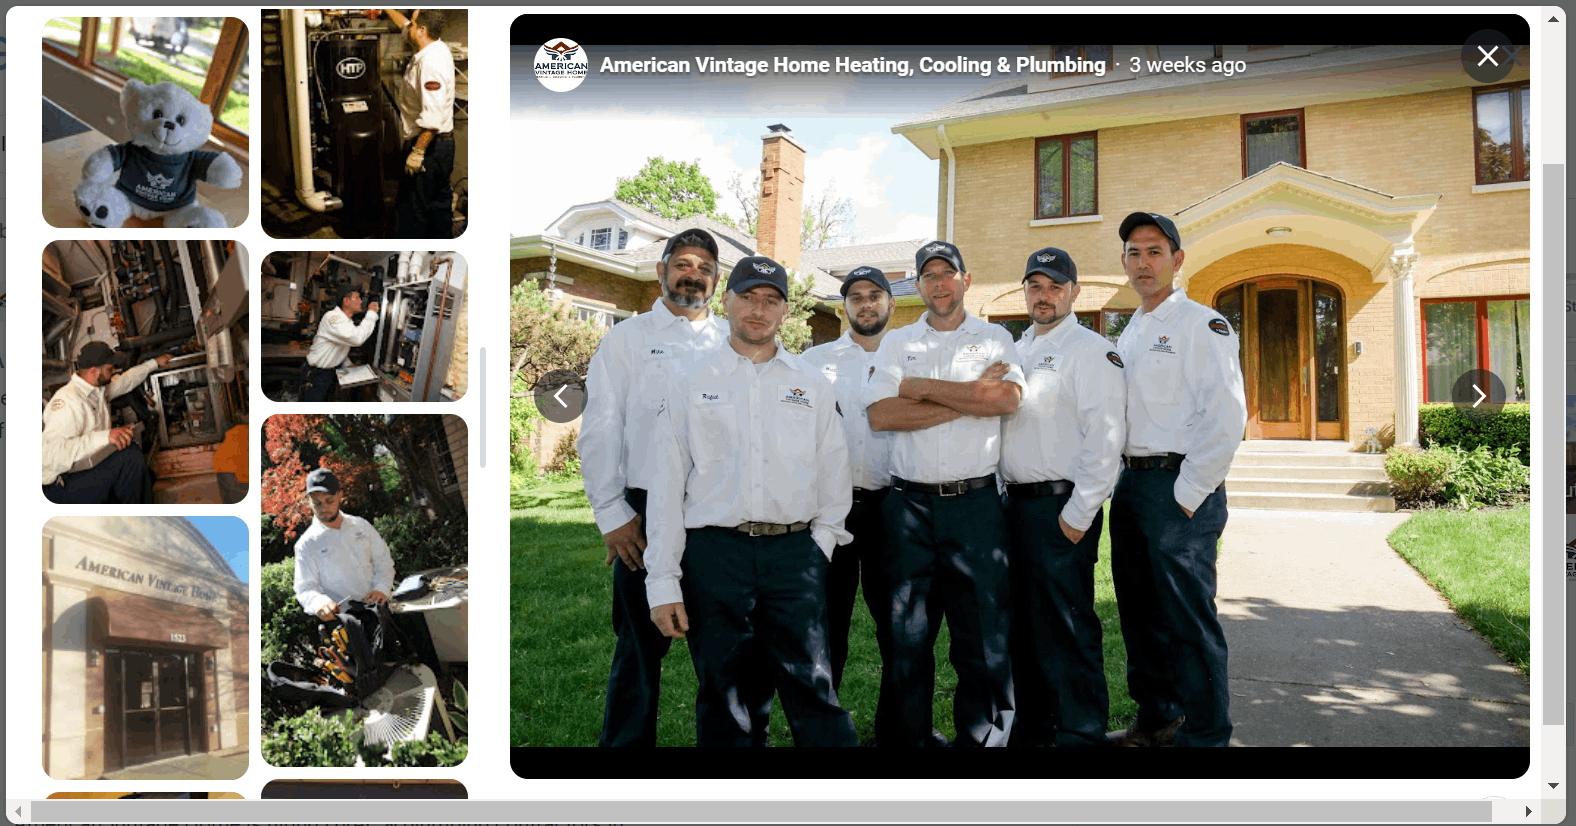 An HVAC company's GBP showing photos of their technicians working.